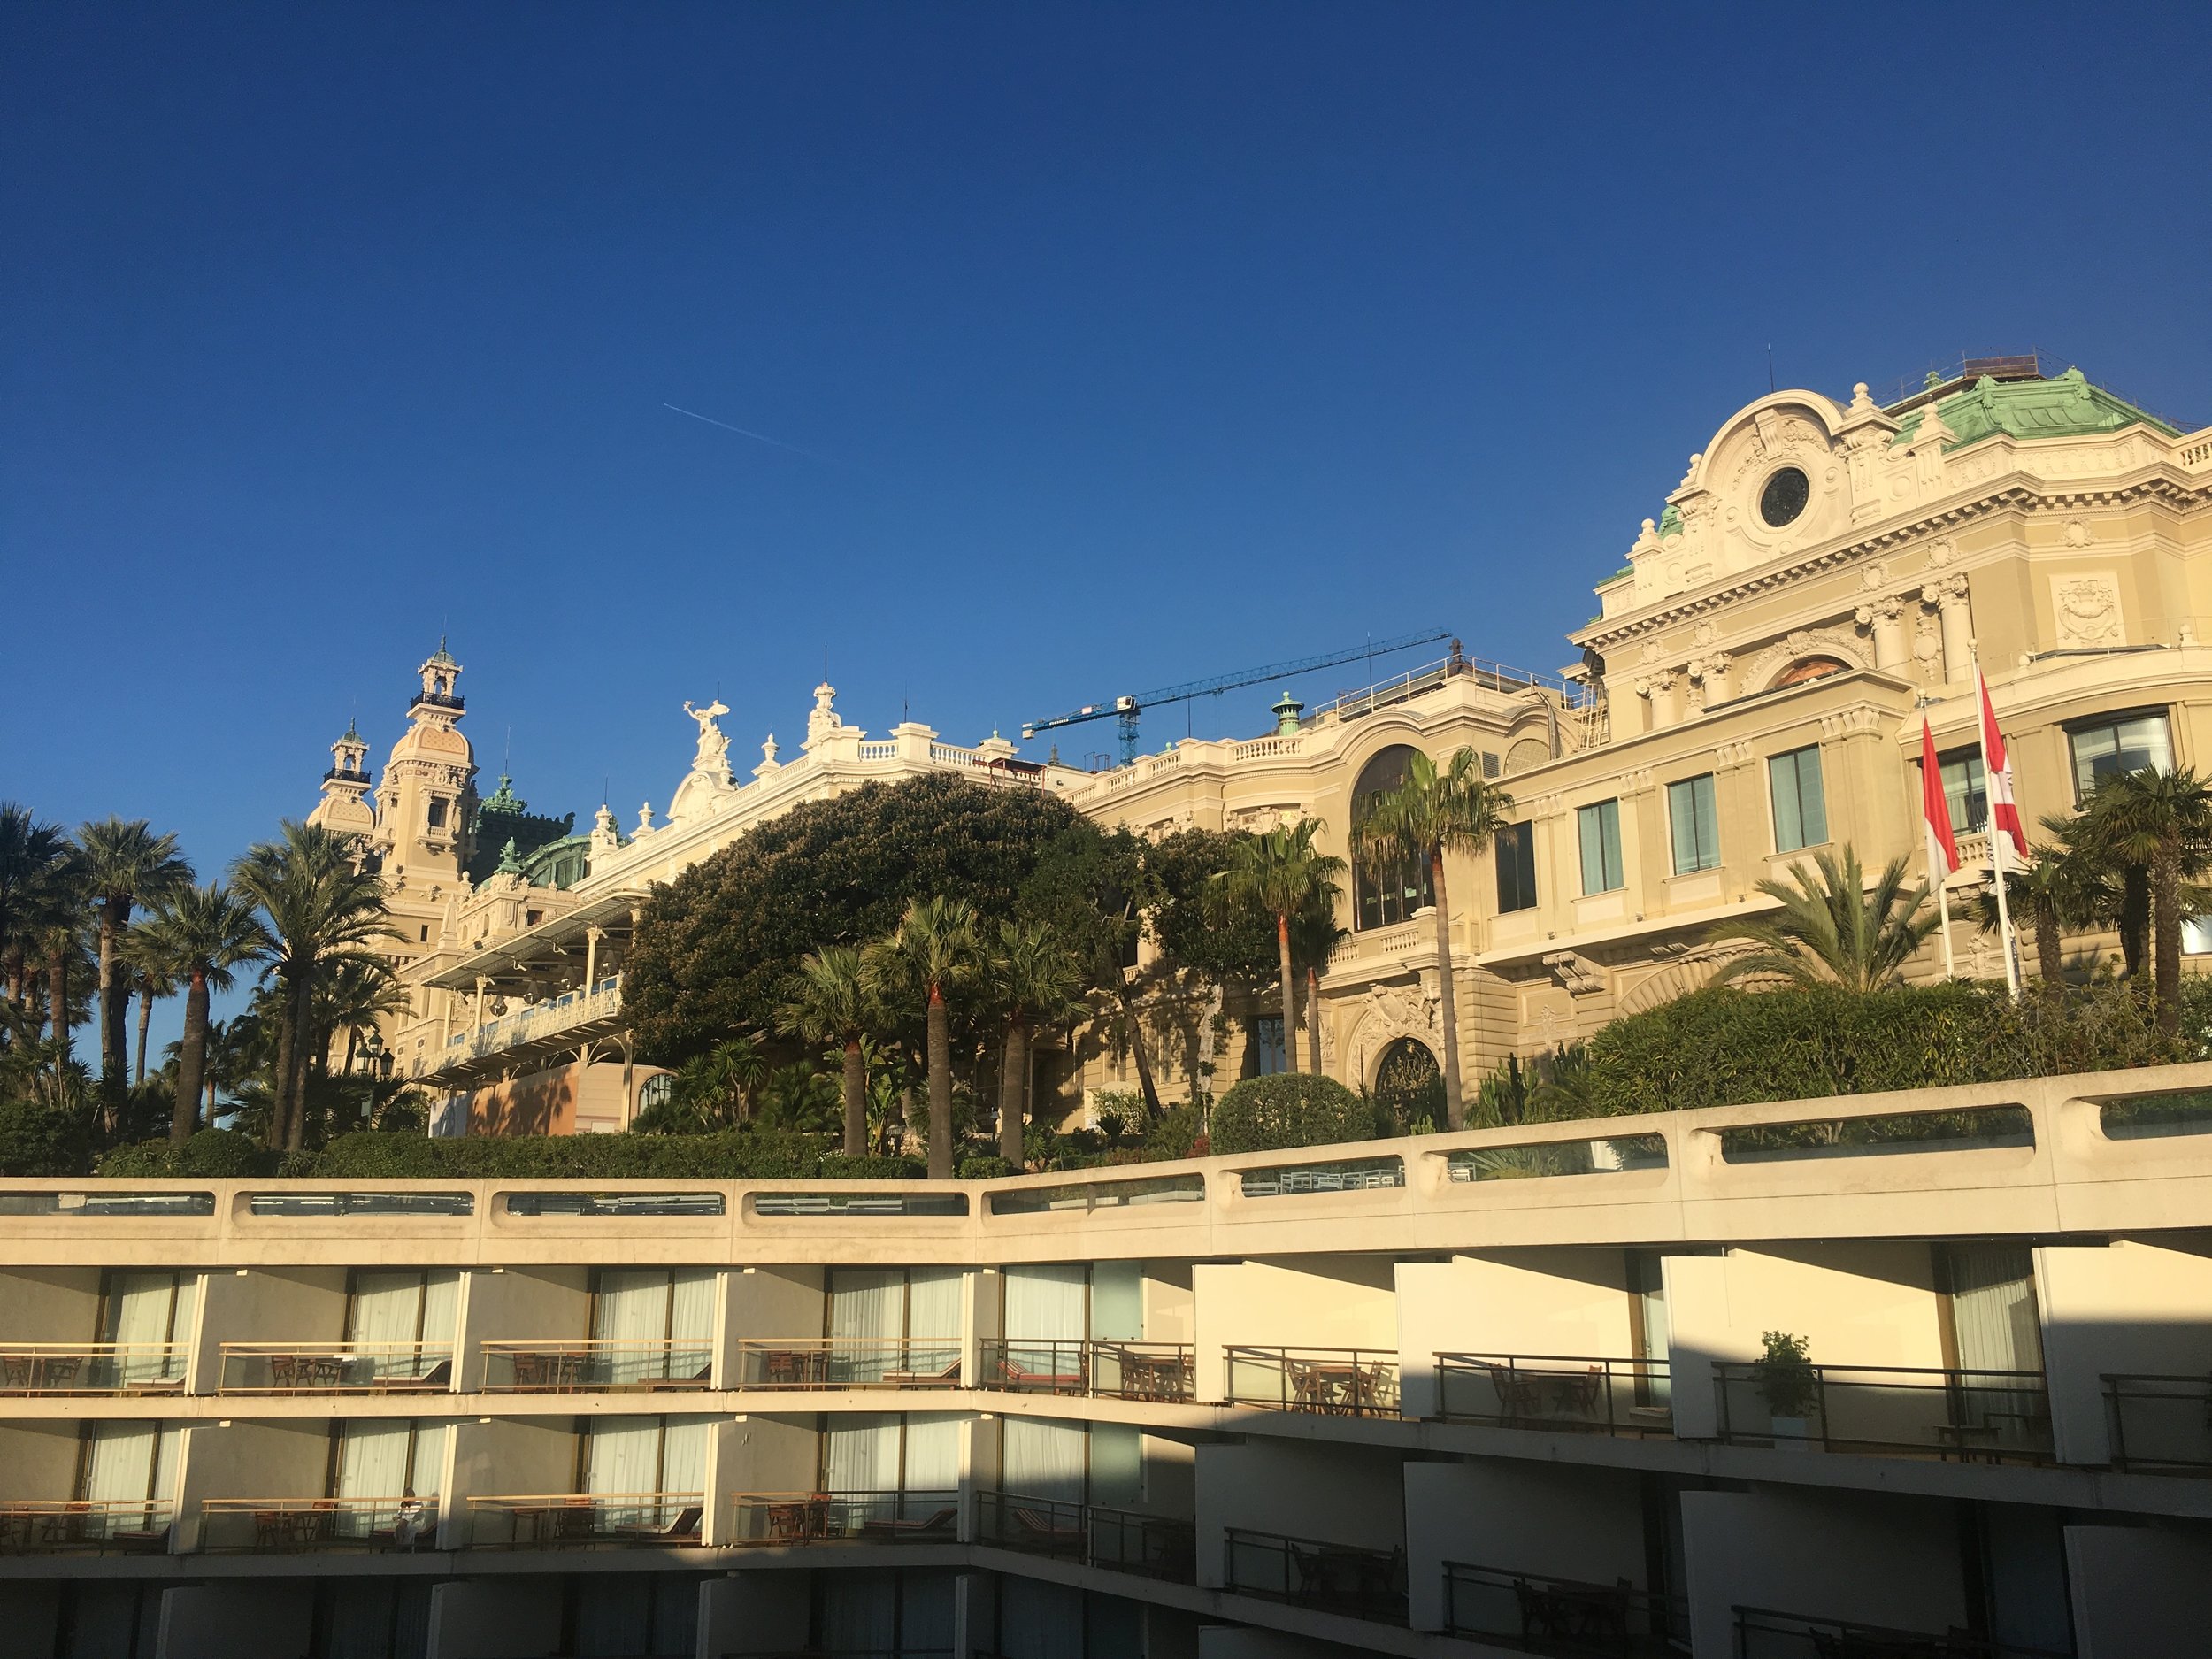  It's steep, it's busy, it's hugely expensive - but isn't Monte Carlo gorgeous?  